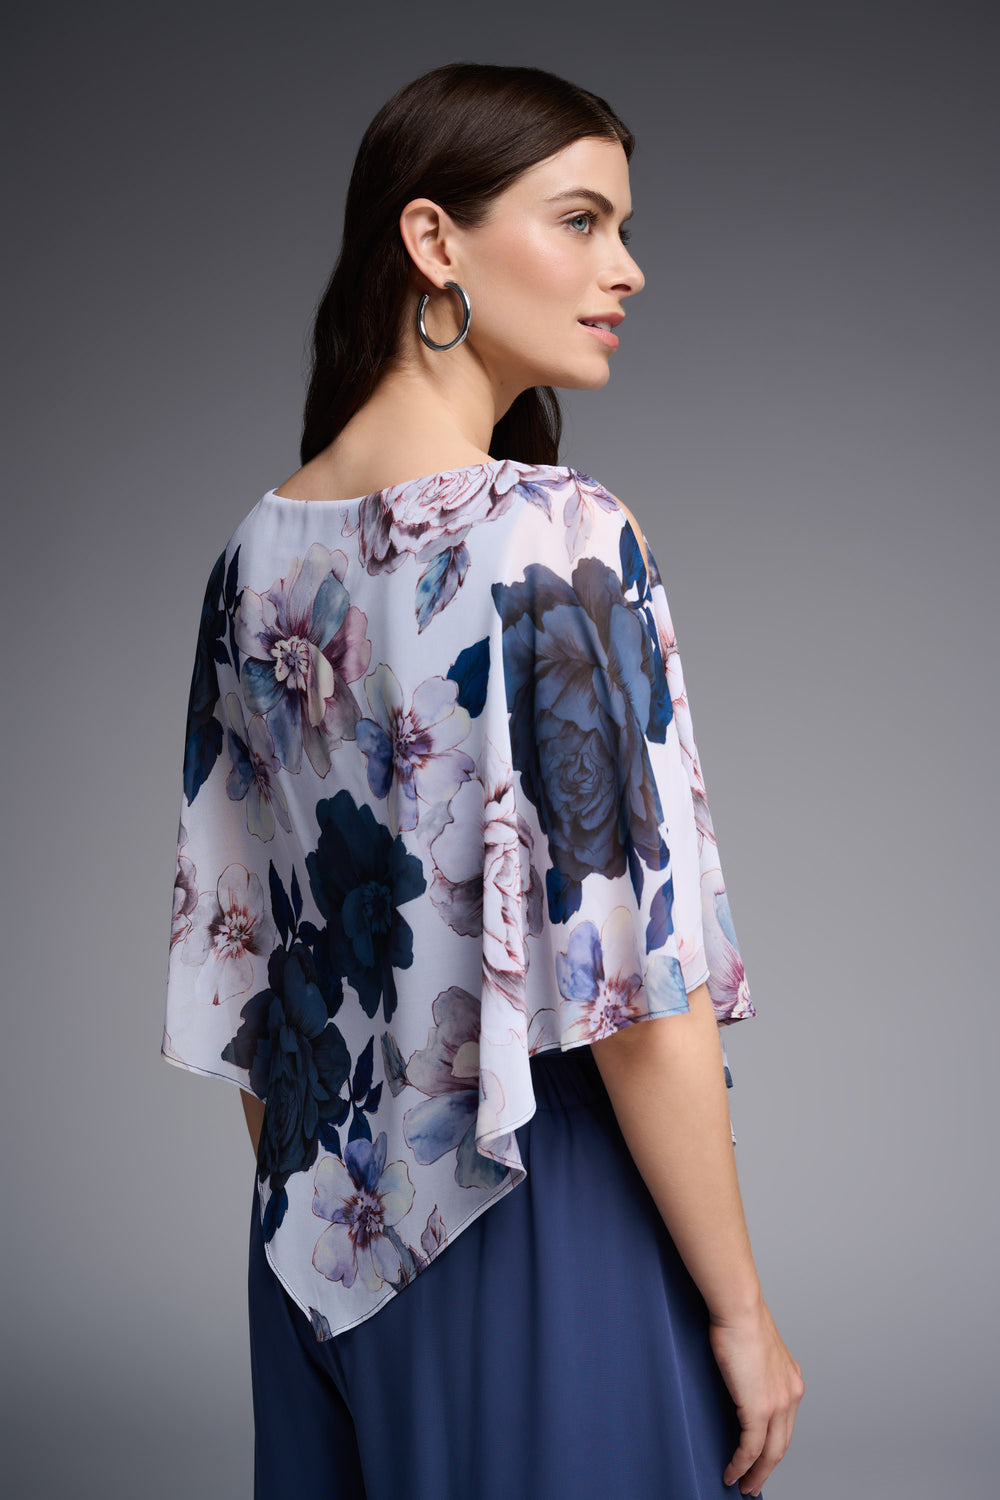 Joseph Ribkoff Spring 2023 women's wedding guest floral poncho chiffon overlay blouse top - back